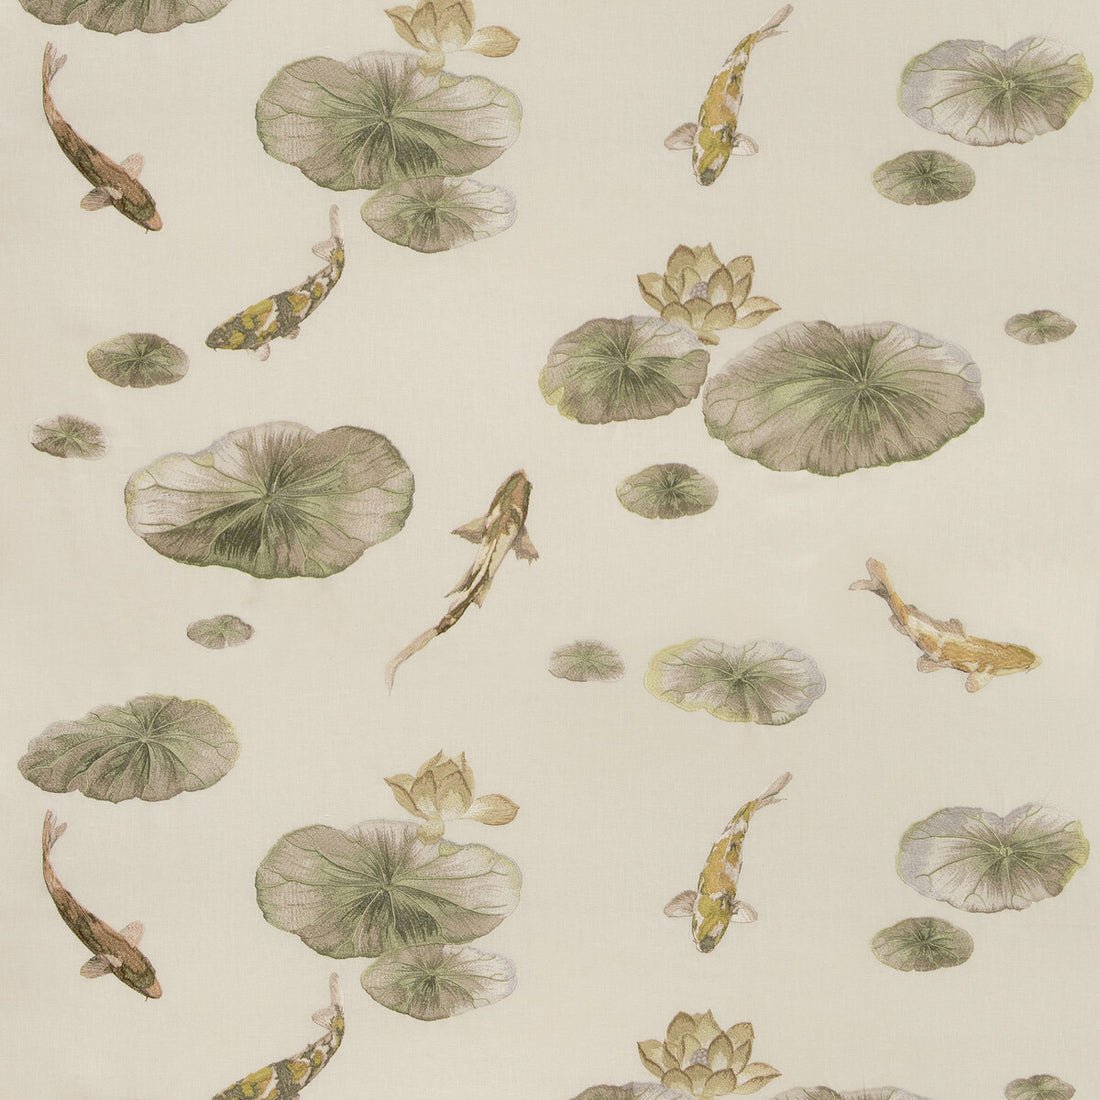 Lotus Pond fabric in limestone color - pattern 35460.11.0 - by Kravet Couture in the Izu Collection collection